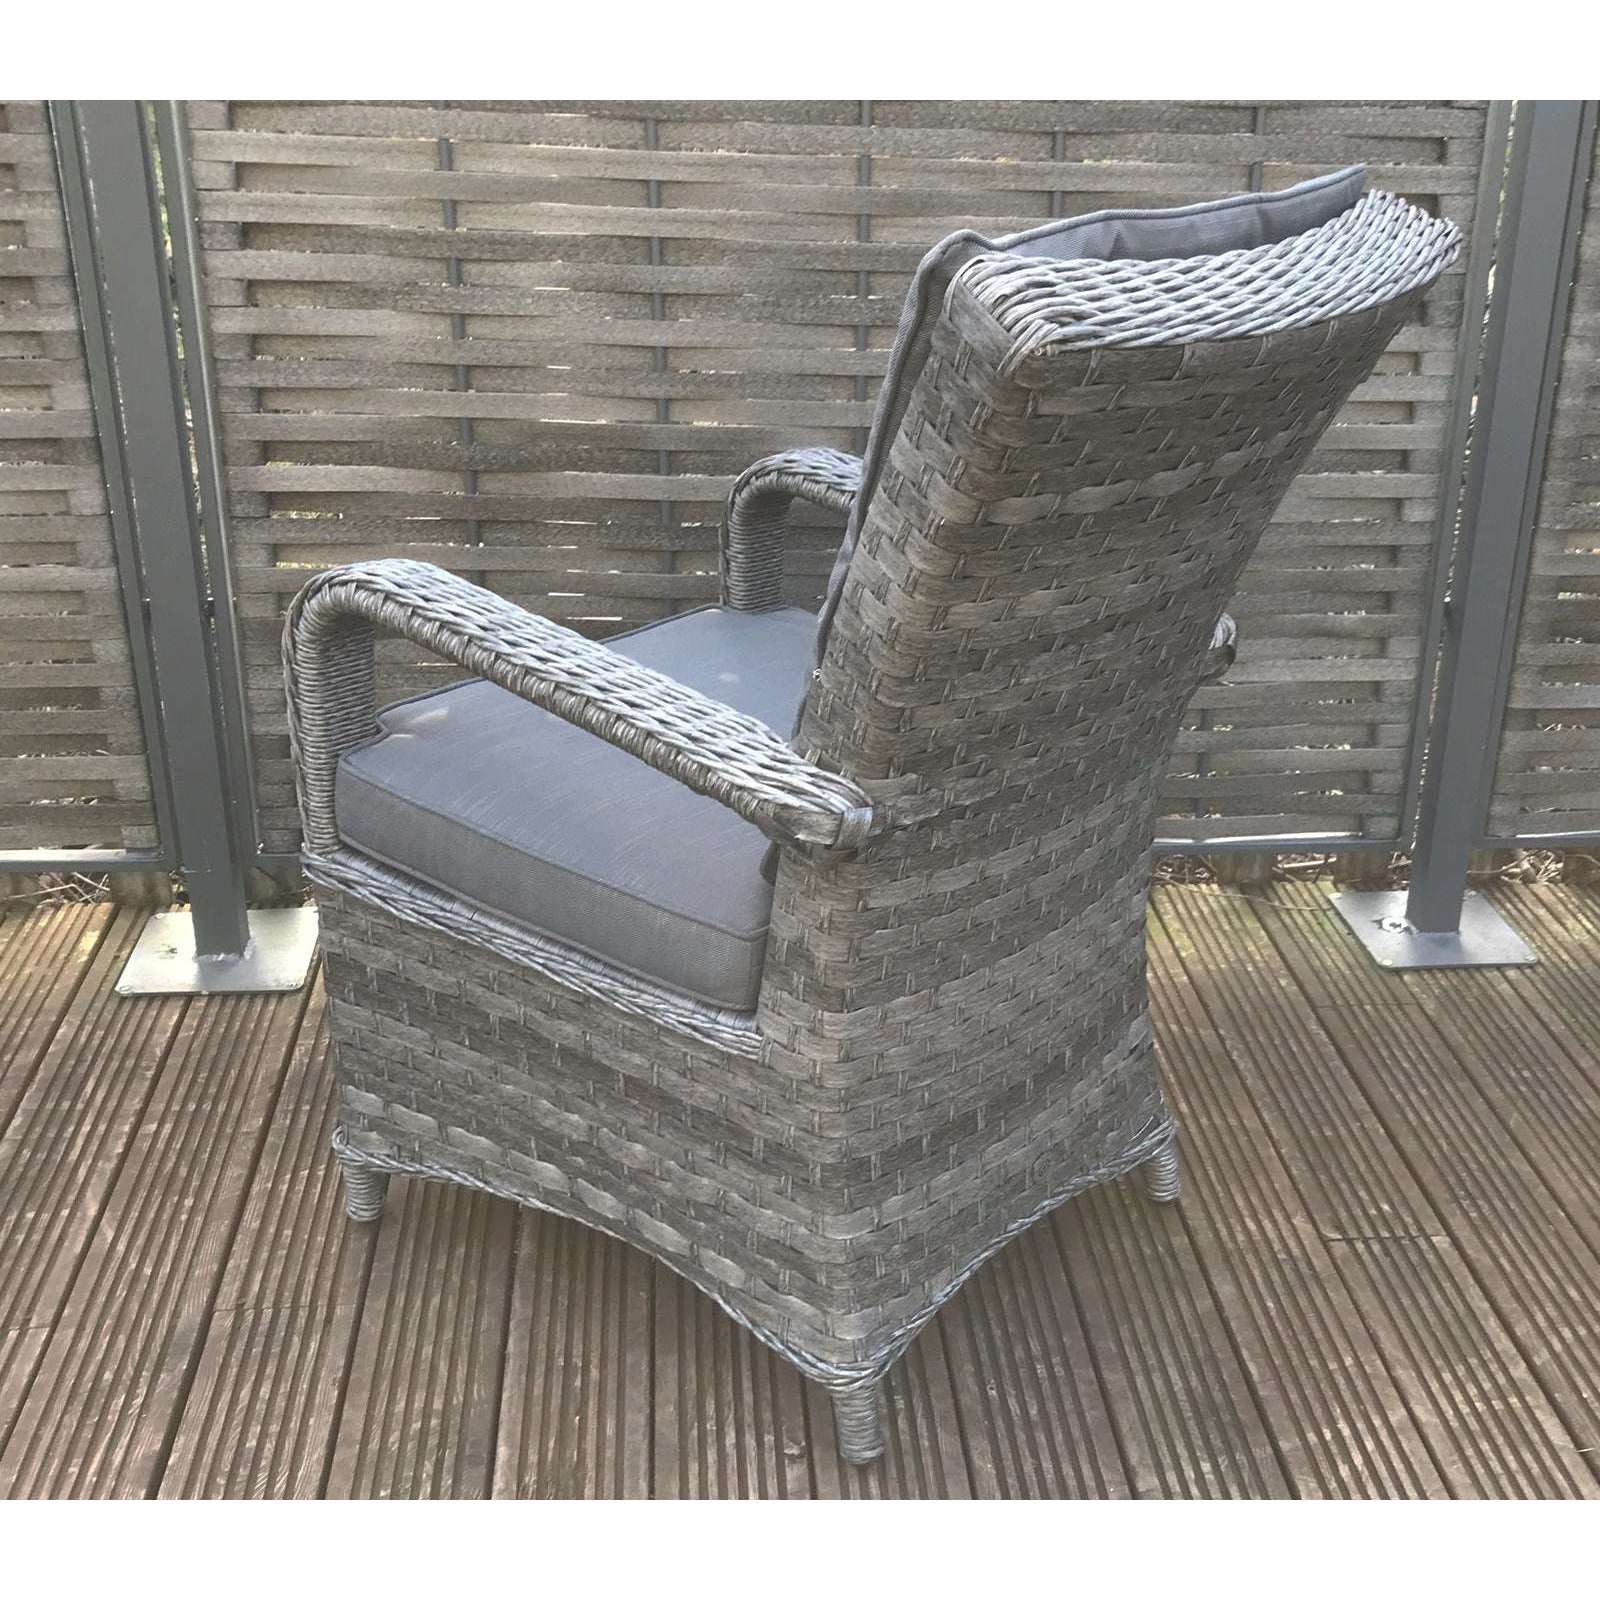 Exceptional Garden:Signature Weave Florence Dining Chair - Grey